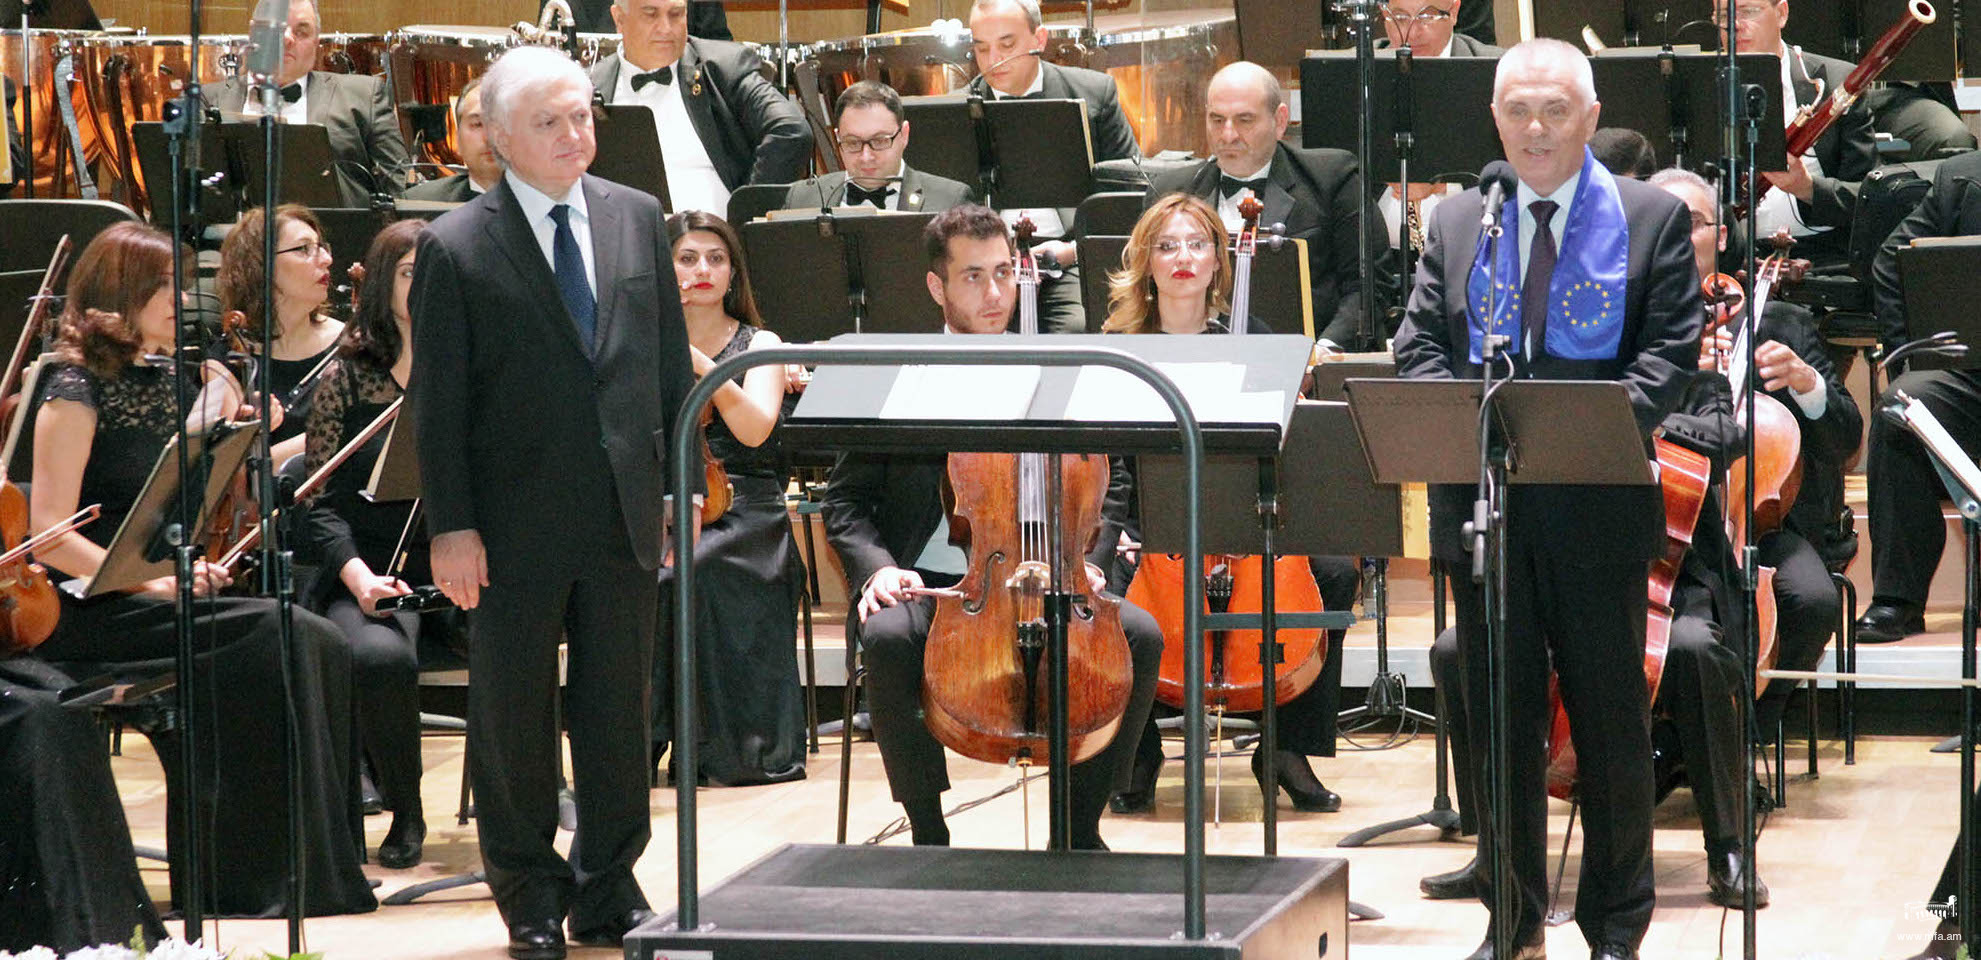 Foreign Minister of Armenia attended the Europe Day Concert